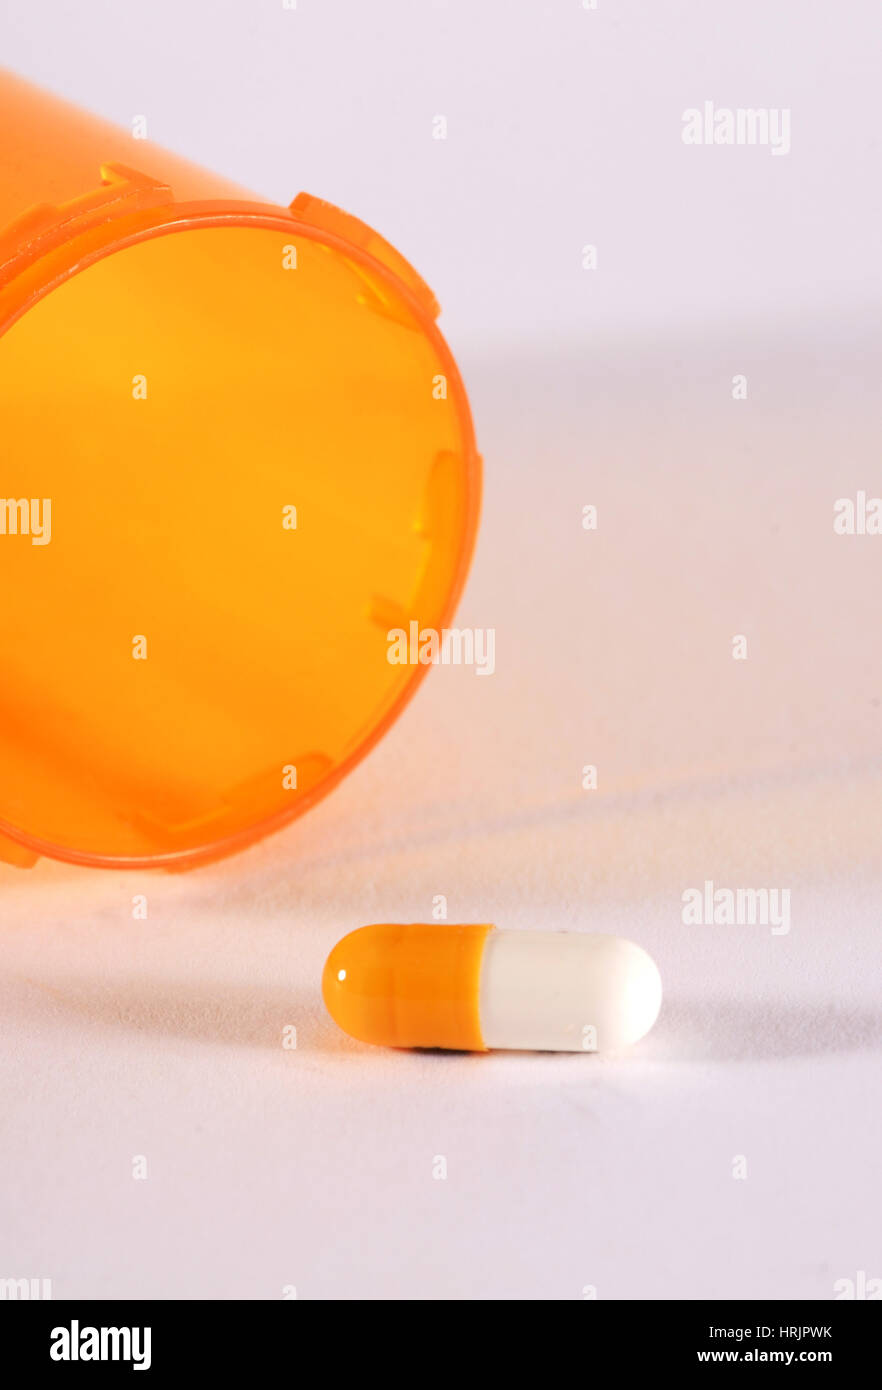 Strattera 18mg with Bottle Stock Photo